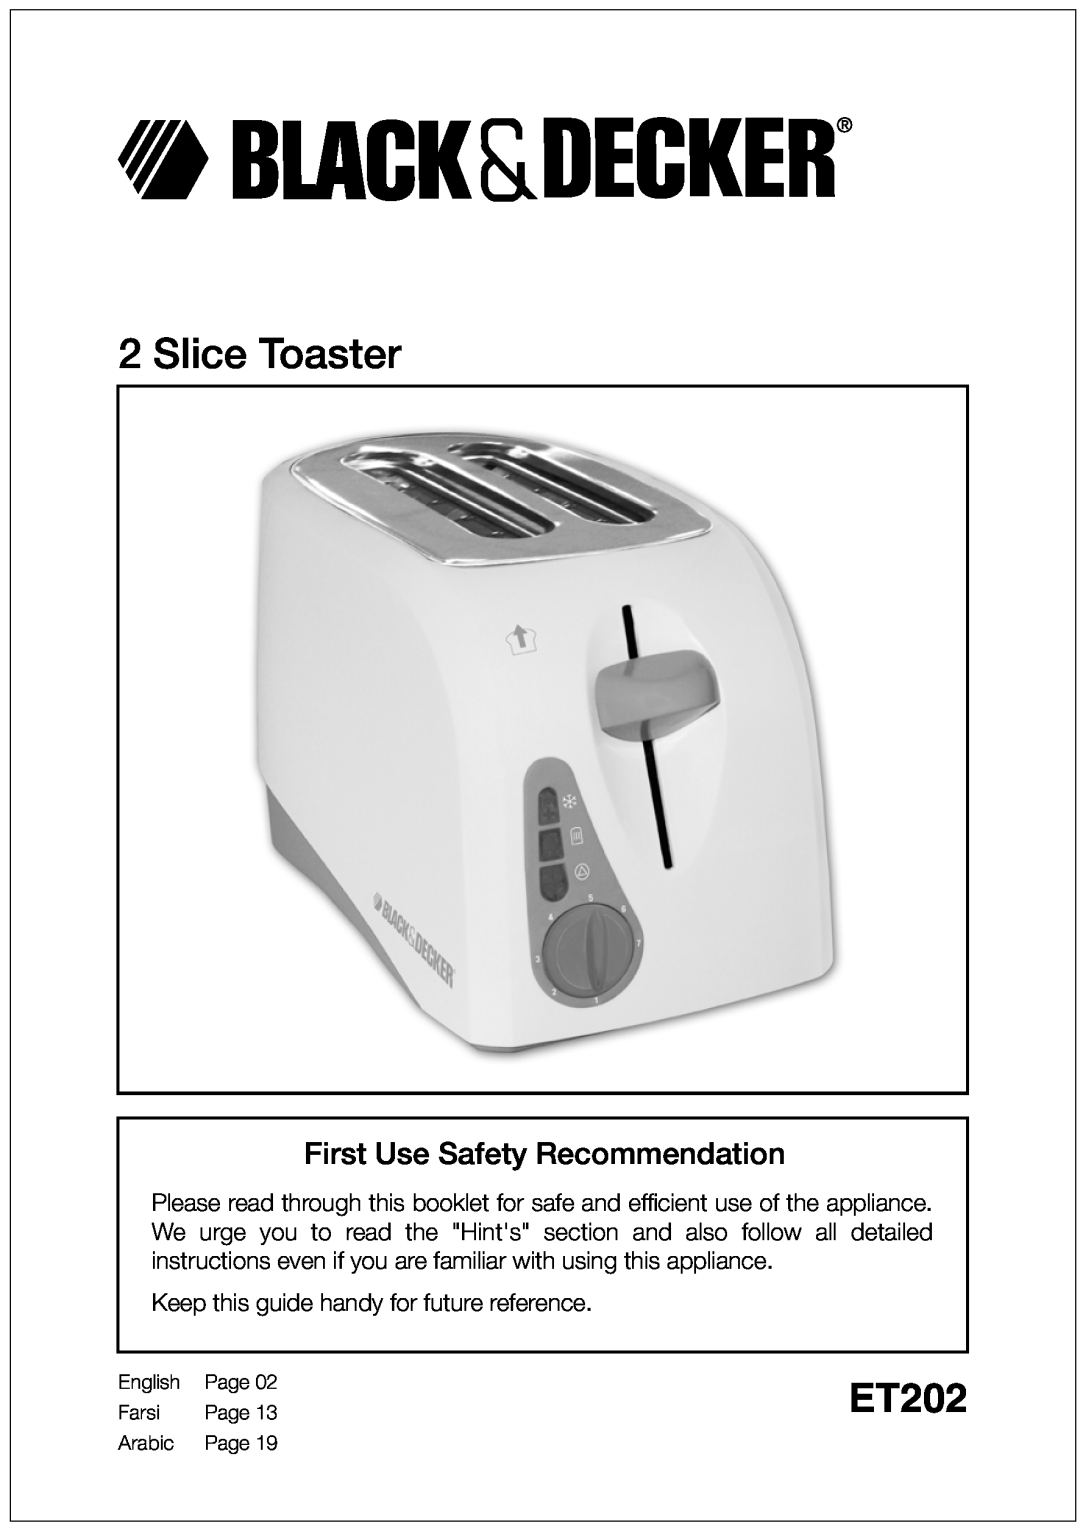 Black & Decker ET202 manual First Use Safety Recommendation, Keep this guide handy for future reference, Slice Toaster 